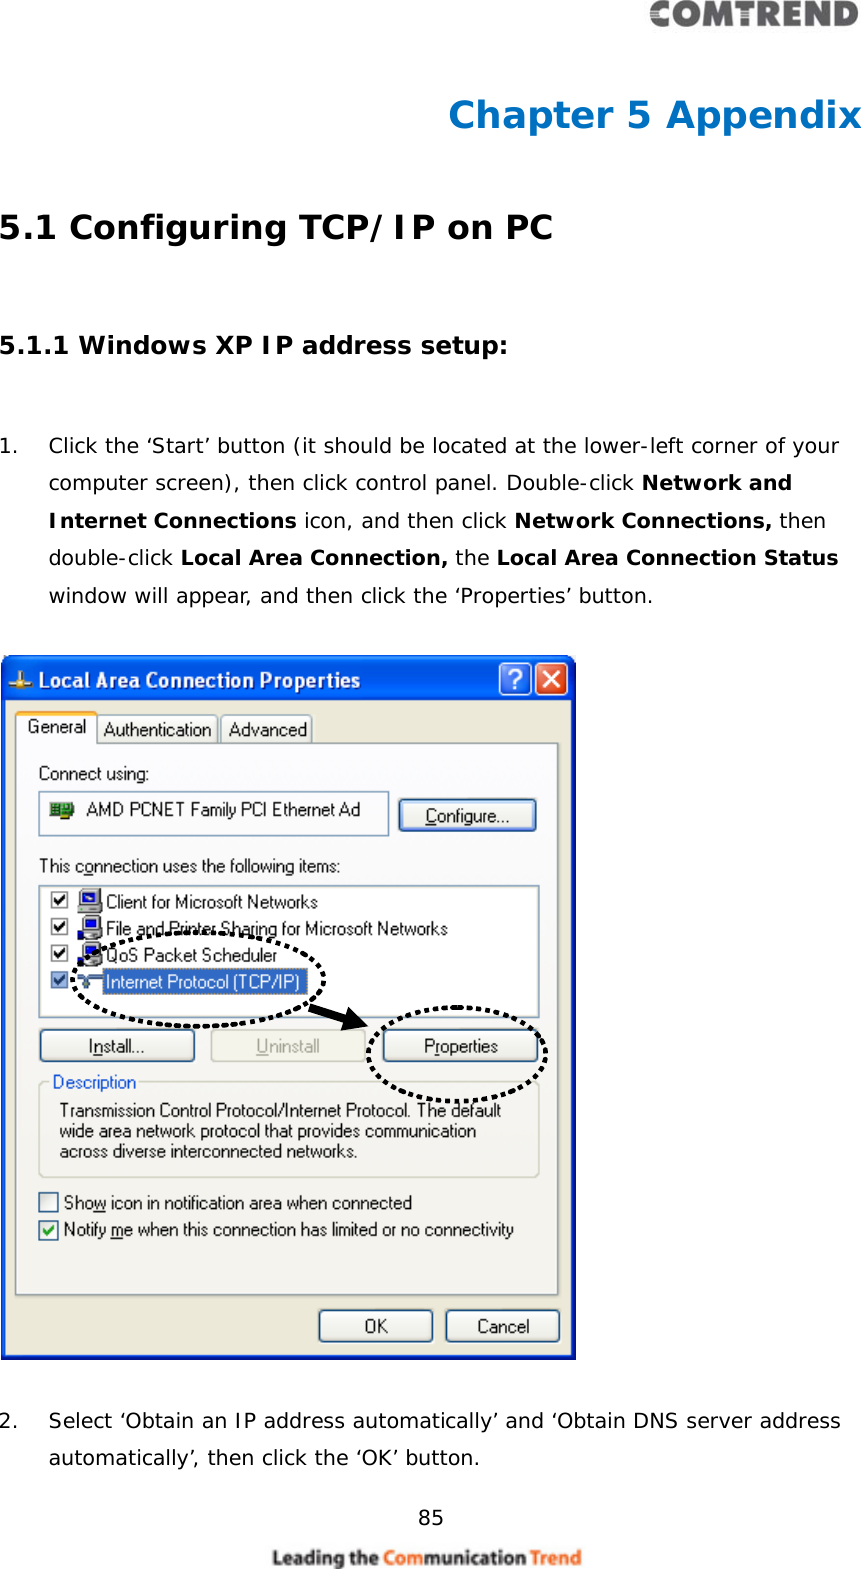     85  Chapter 5 Appendix 5.1 Configuring TCP/IP on PC  5.1.1 Windows XP IP address setup:  1. Click the ‘Start’ button (it should be located at the lower-left corner of your computer screen), then click control panel. Double-click Network and Internet Connections icon, and then click Network Connections, then double-click Local Area Connection, the Local Area Connection Status window will appear, and then click the ‘Properties’ button.    2. Select ‘Obtain an IP address automatically’ and ‘Obtain DNS server address automatically’, then click the ‘OK’ button. 